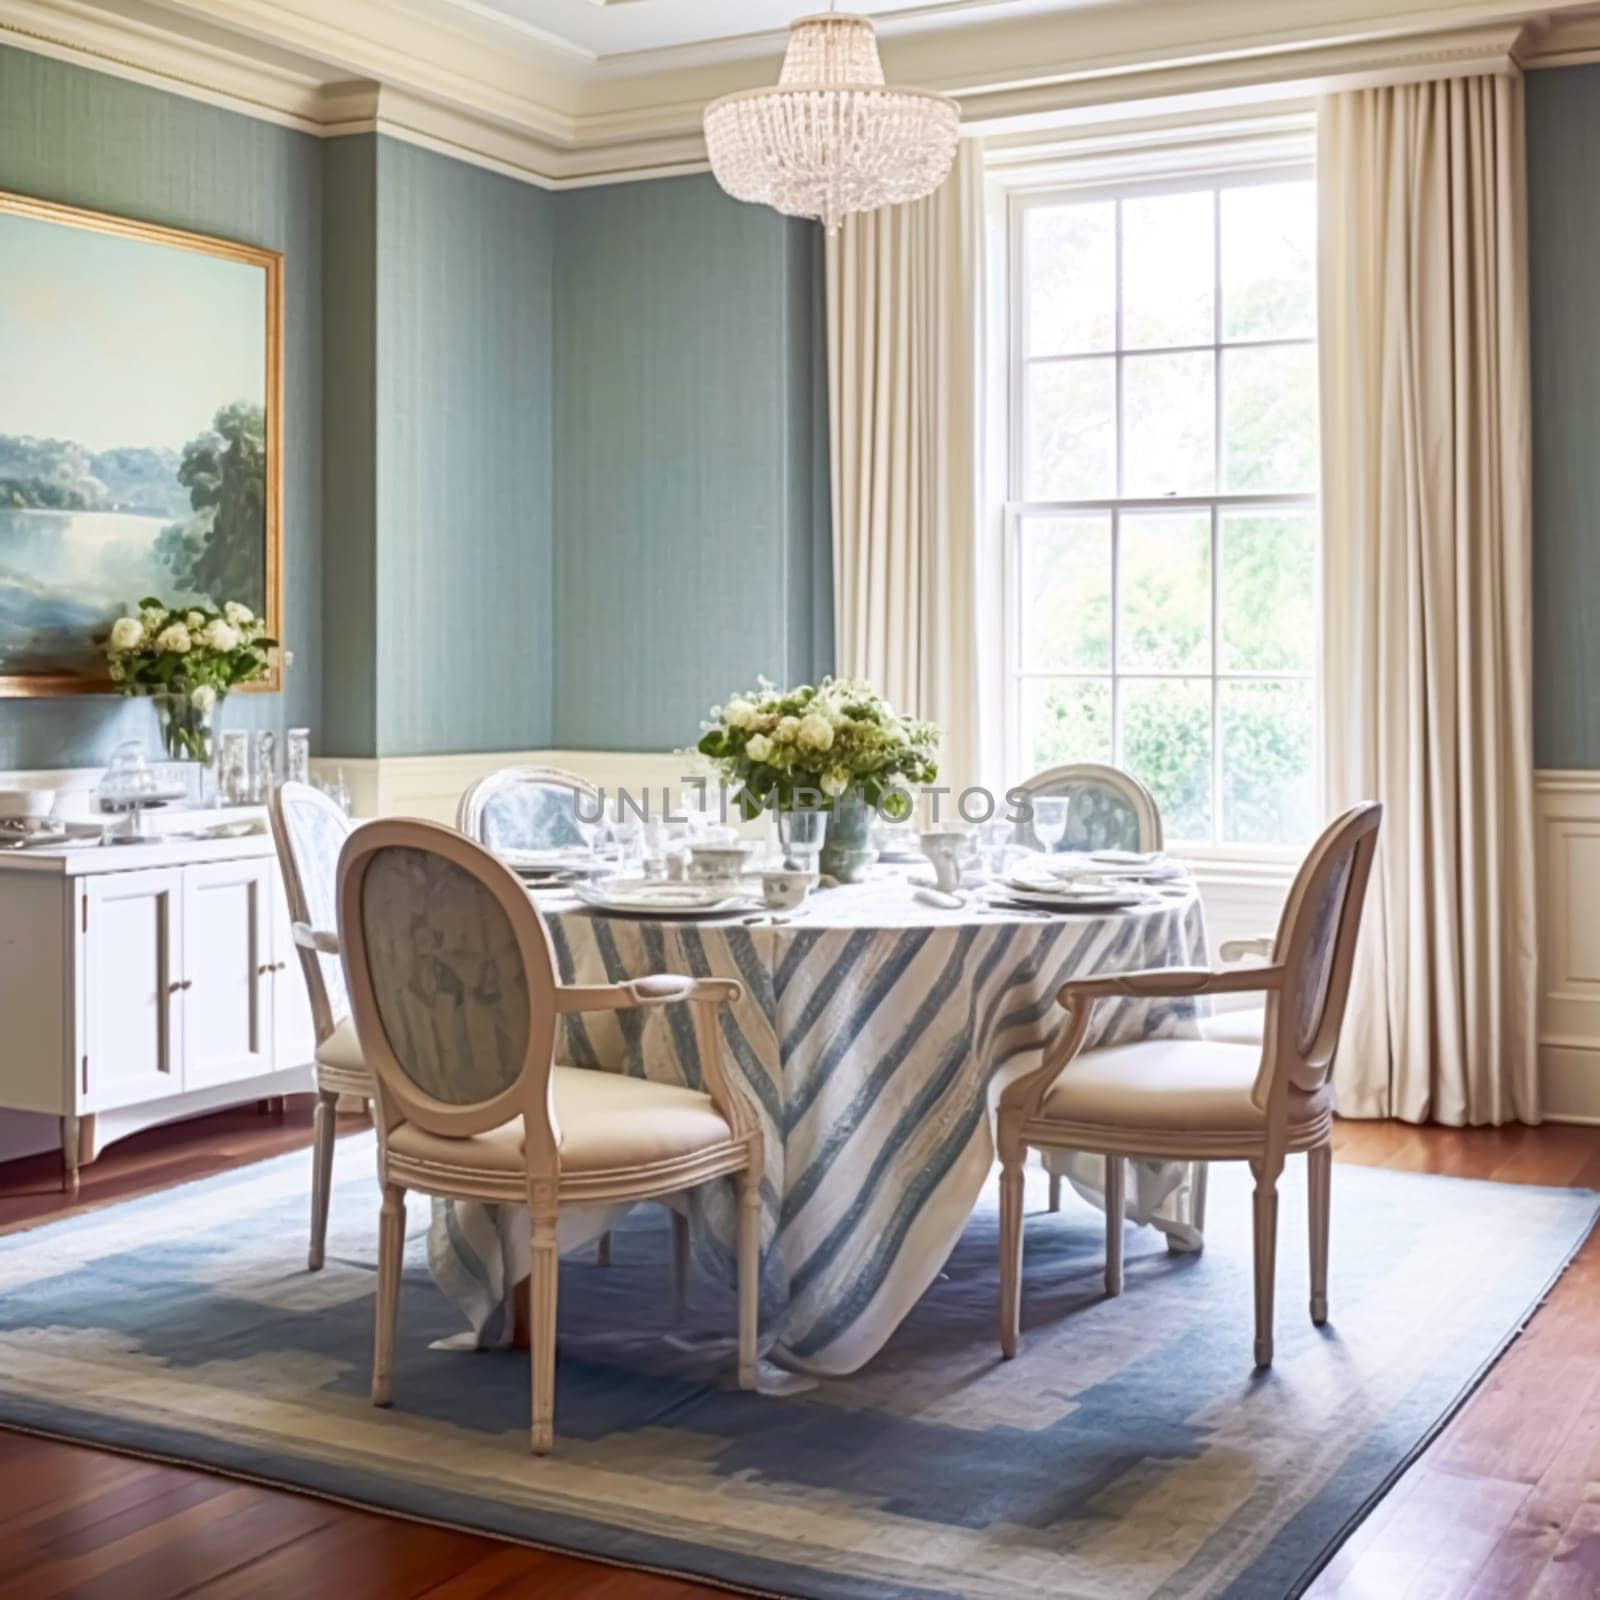 Dining room decor, interior design and house improvement, elegant table with chairs, furniture and classic blue home decor, country cottage style idea